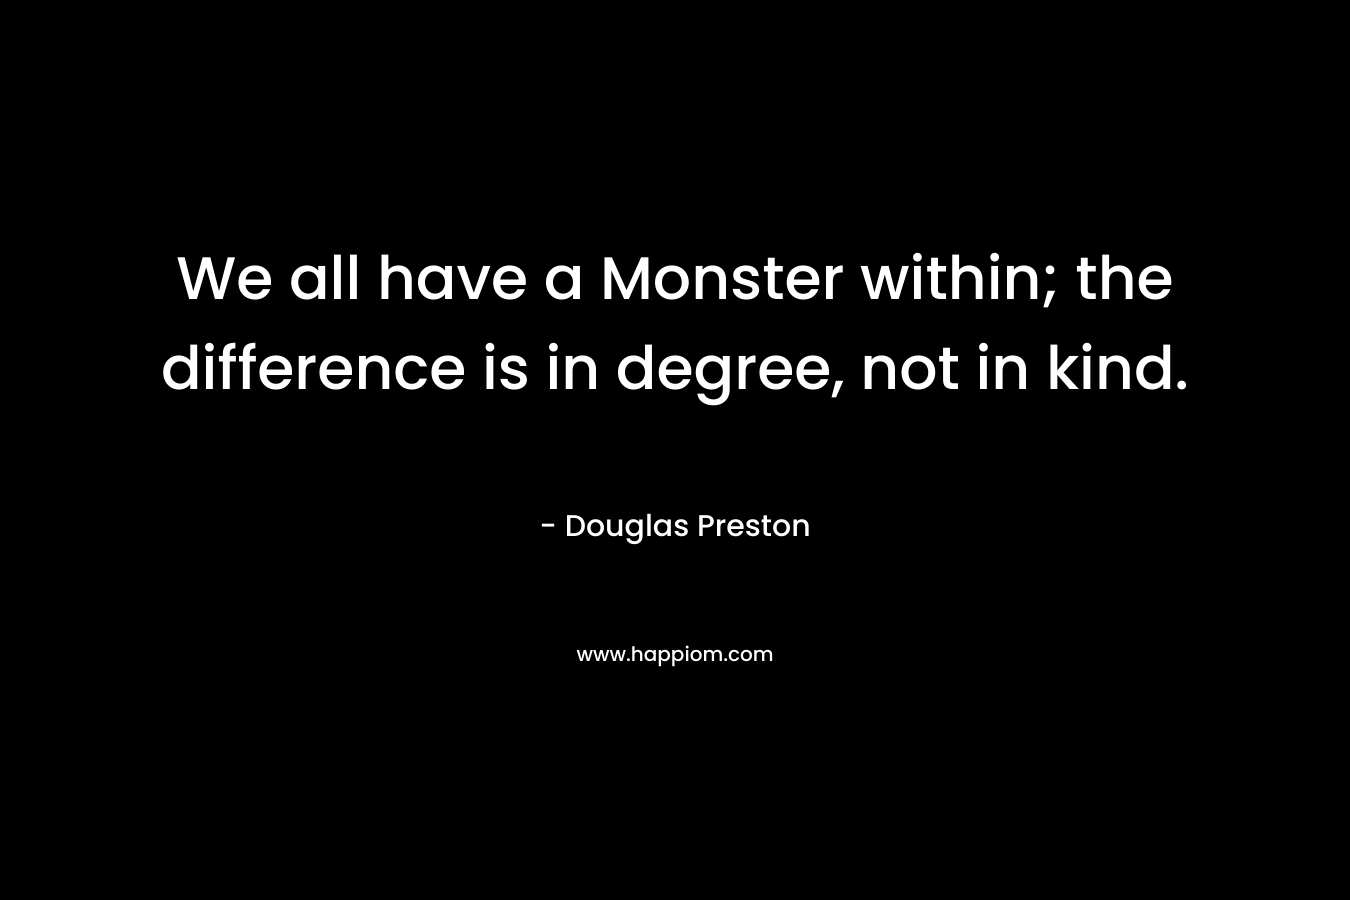 We all have a Monster within; the difference is in degree, not in kind. – Douglas Preston